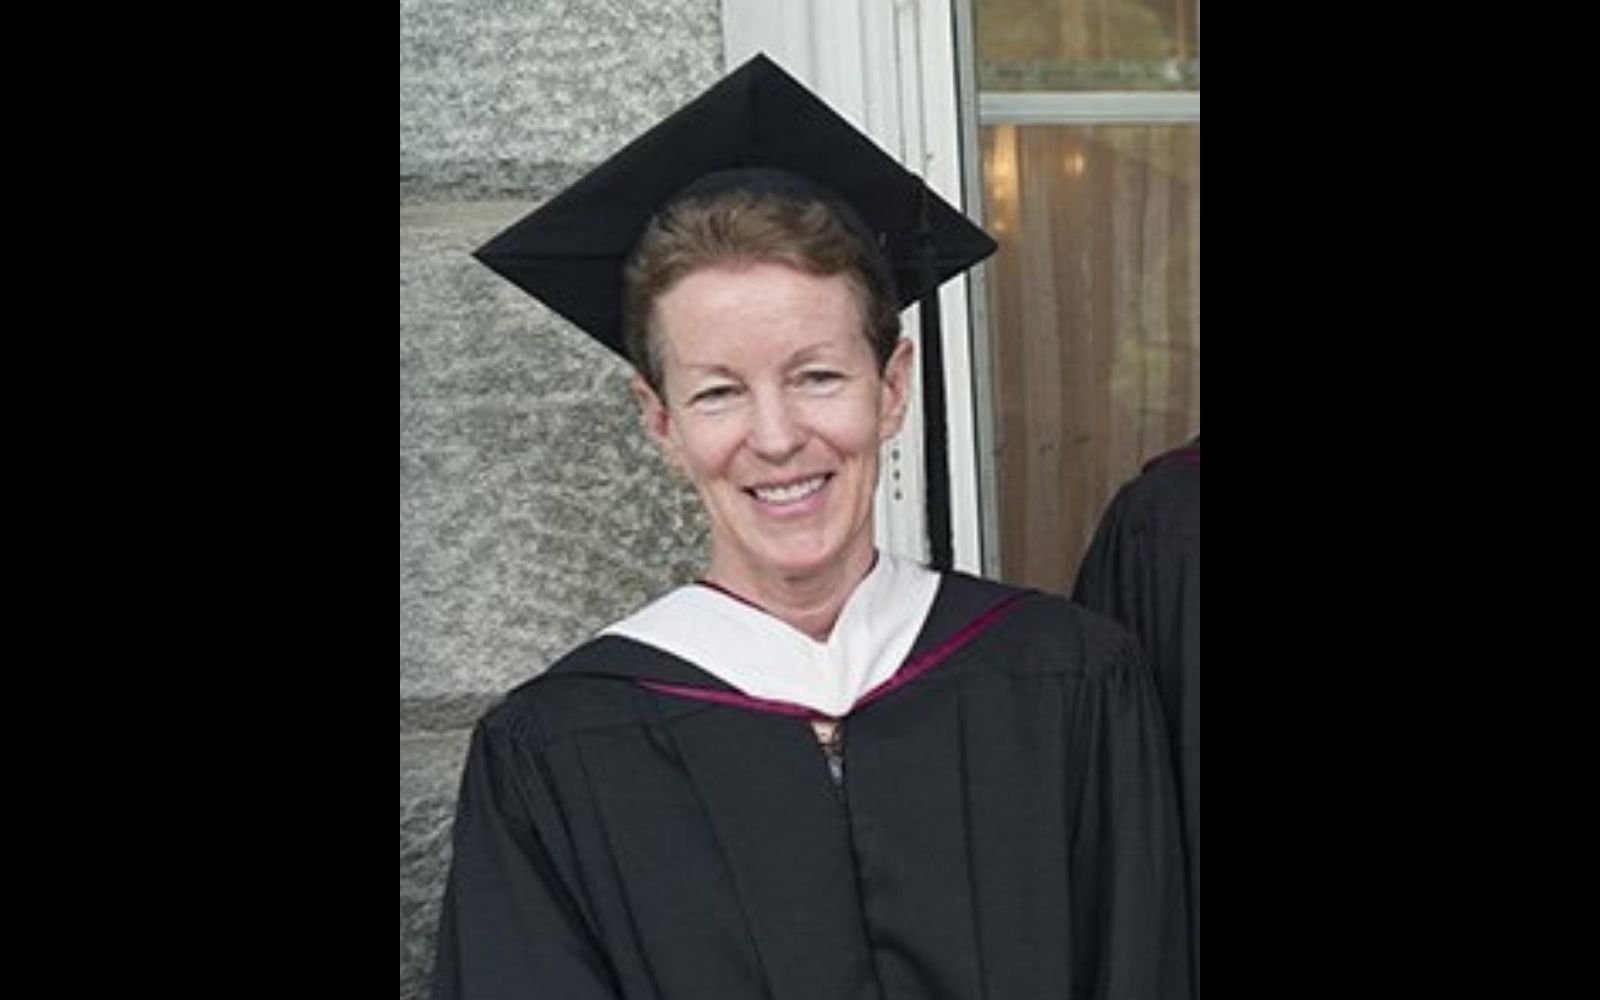 A woman with close cropped hair, wearing graduation regalia, smiles at the camera